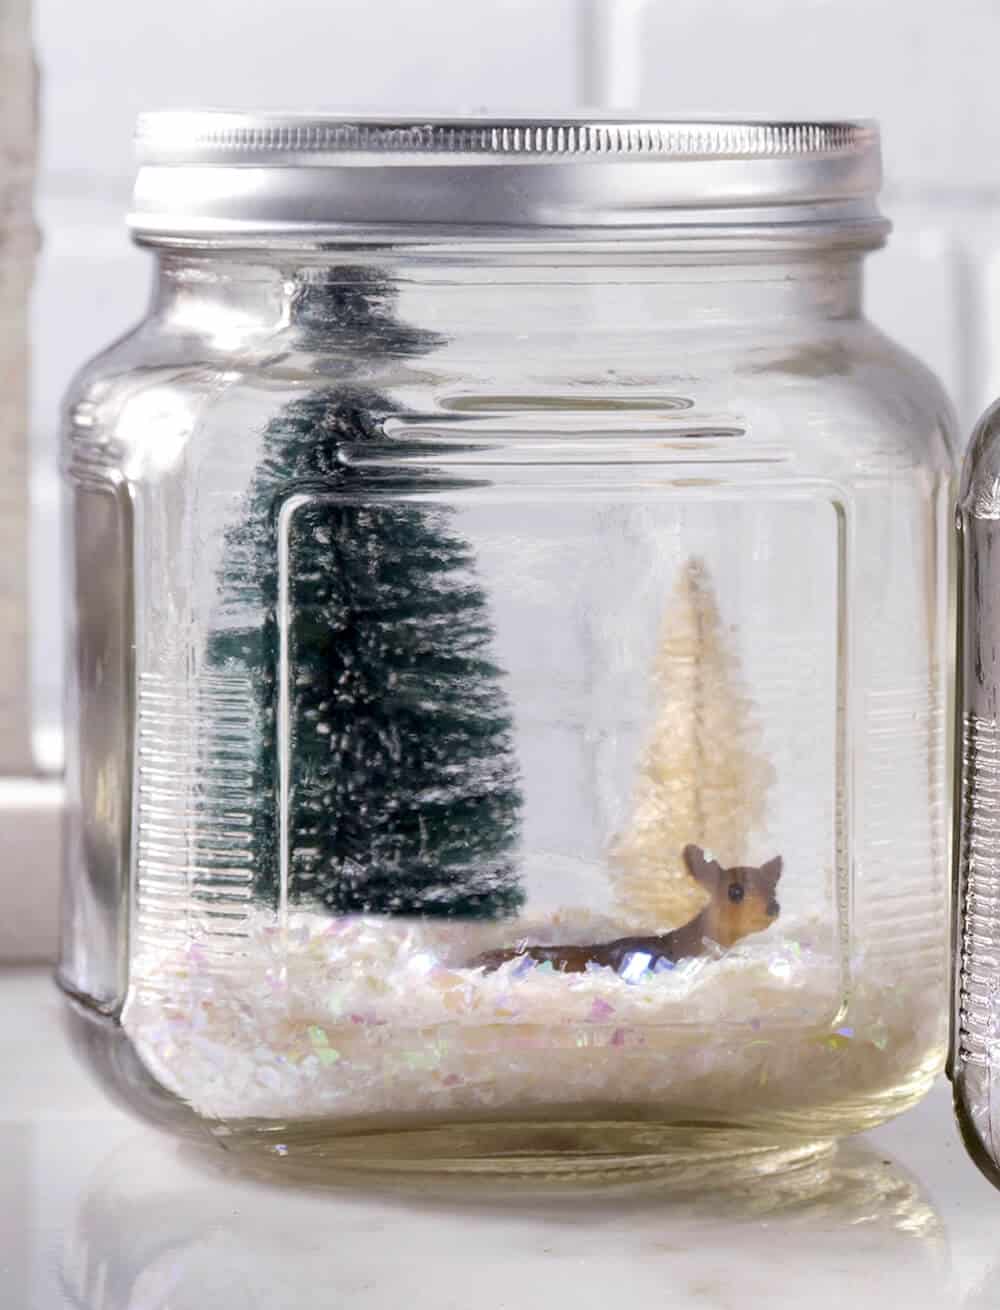 Winter wonderland glass jar filled with artificial snow, bottle brush trees, and a plastic deer